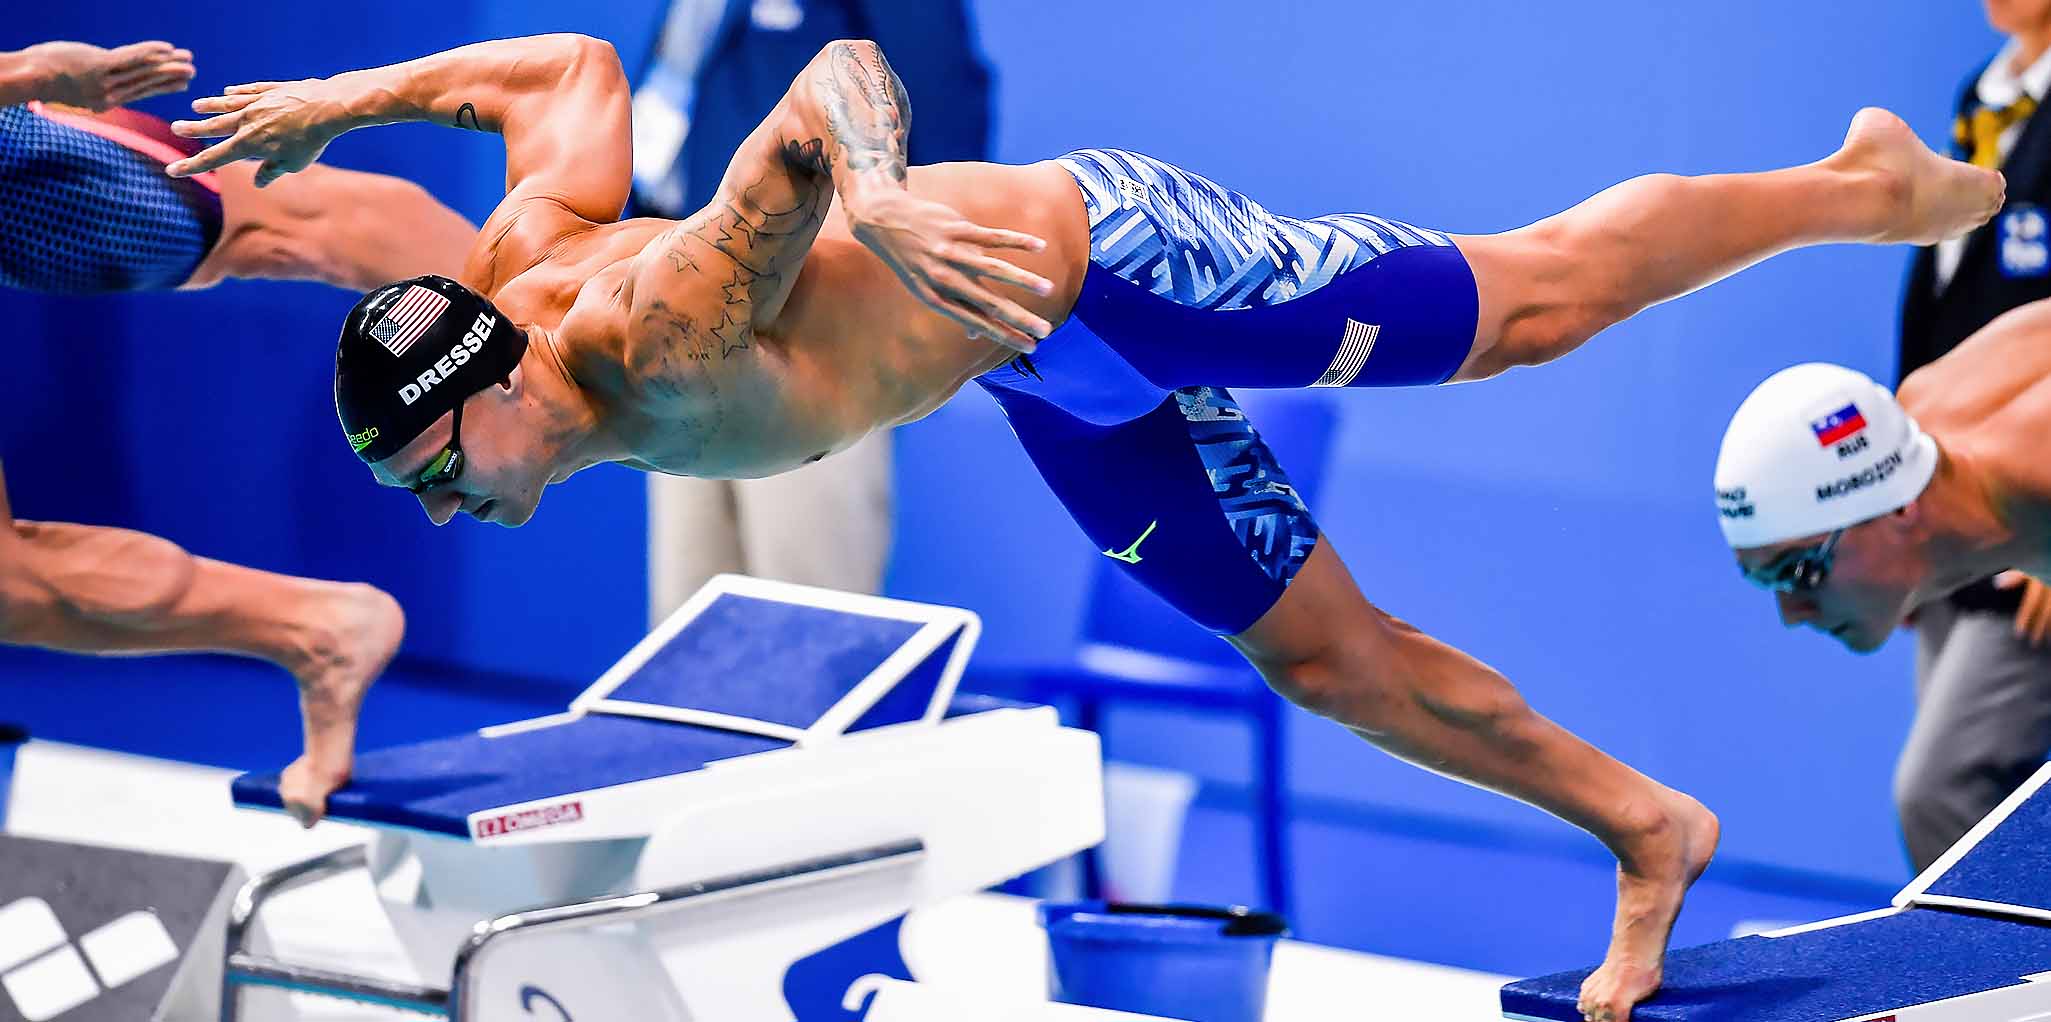 Analysis: Caeleb Dressel is the Fastest Ever in the first 15m - fastlane4